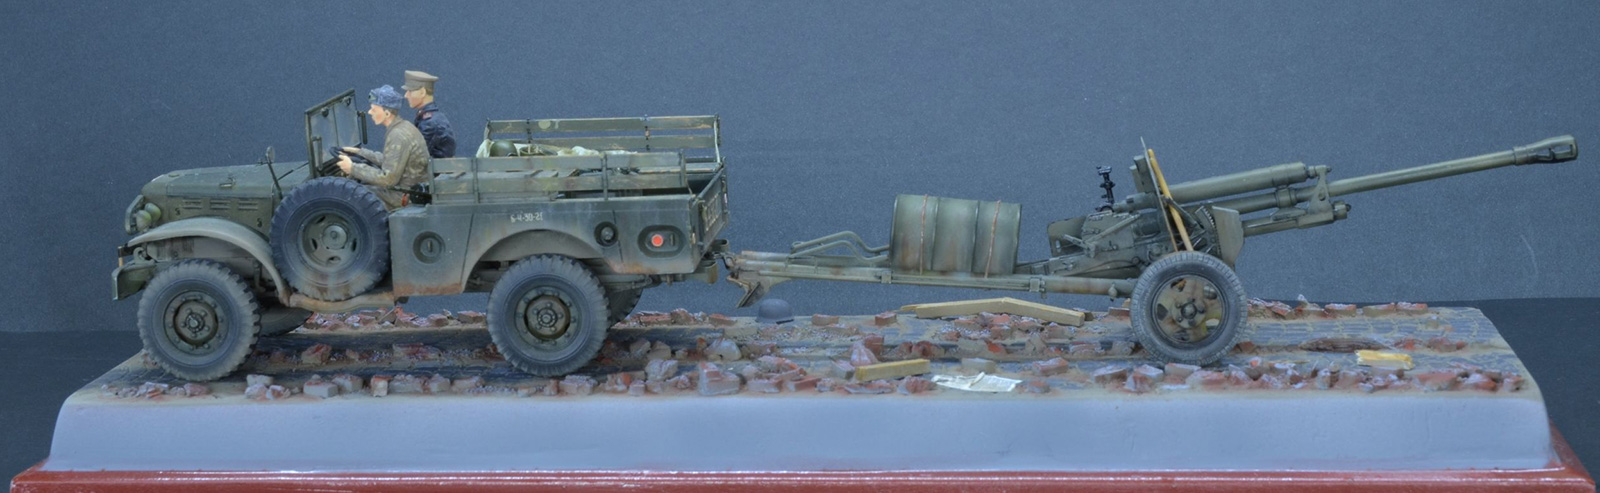 Dioramas and Vignettes: Dodge WC-51 and ZiS-3, photo #3